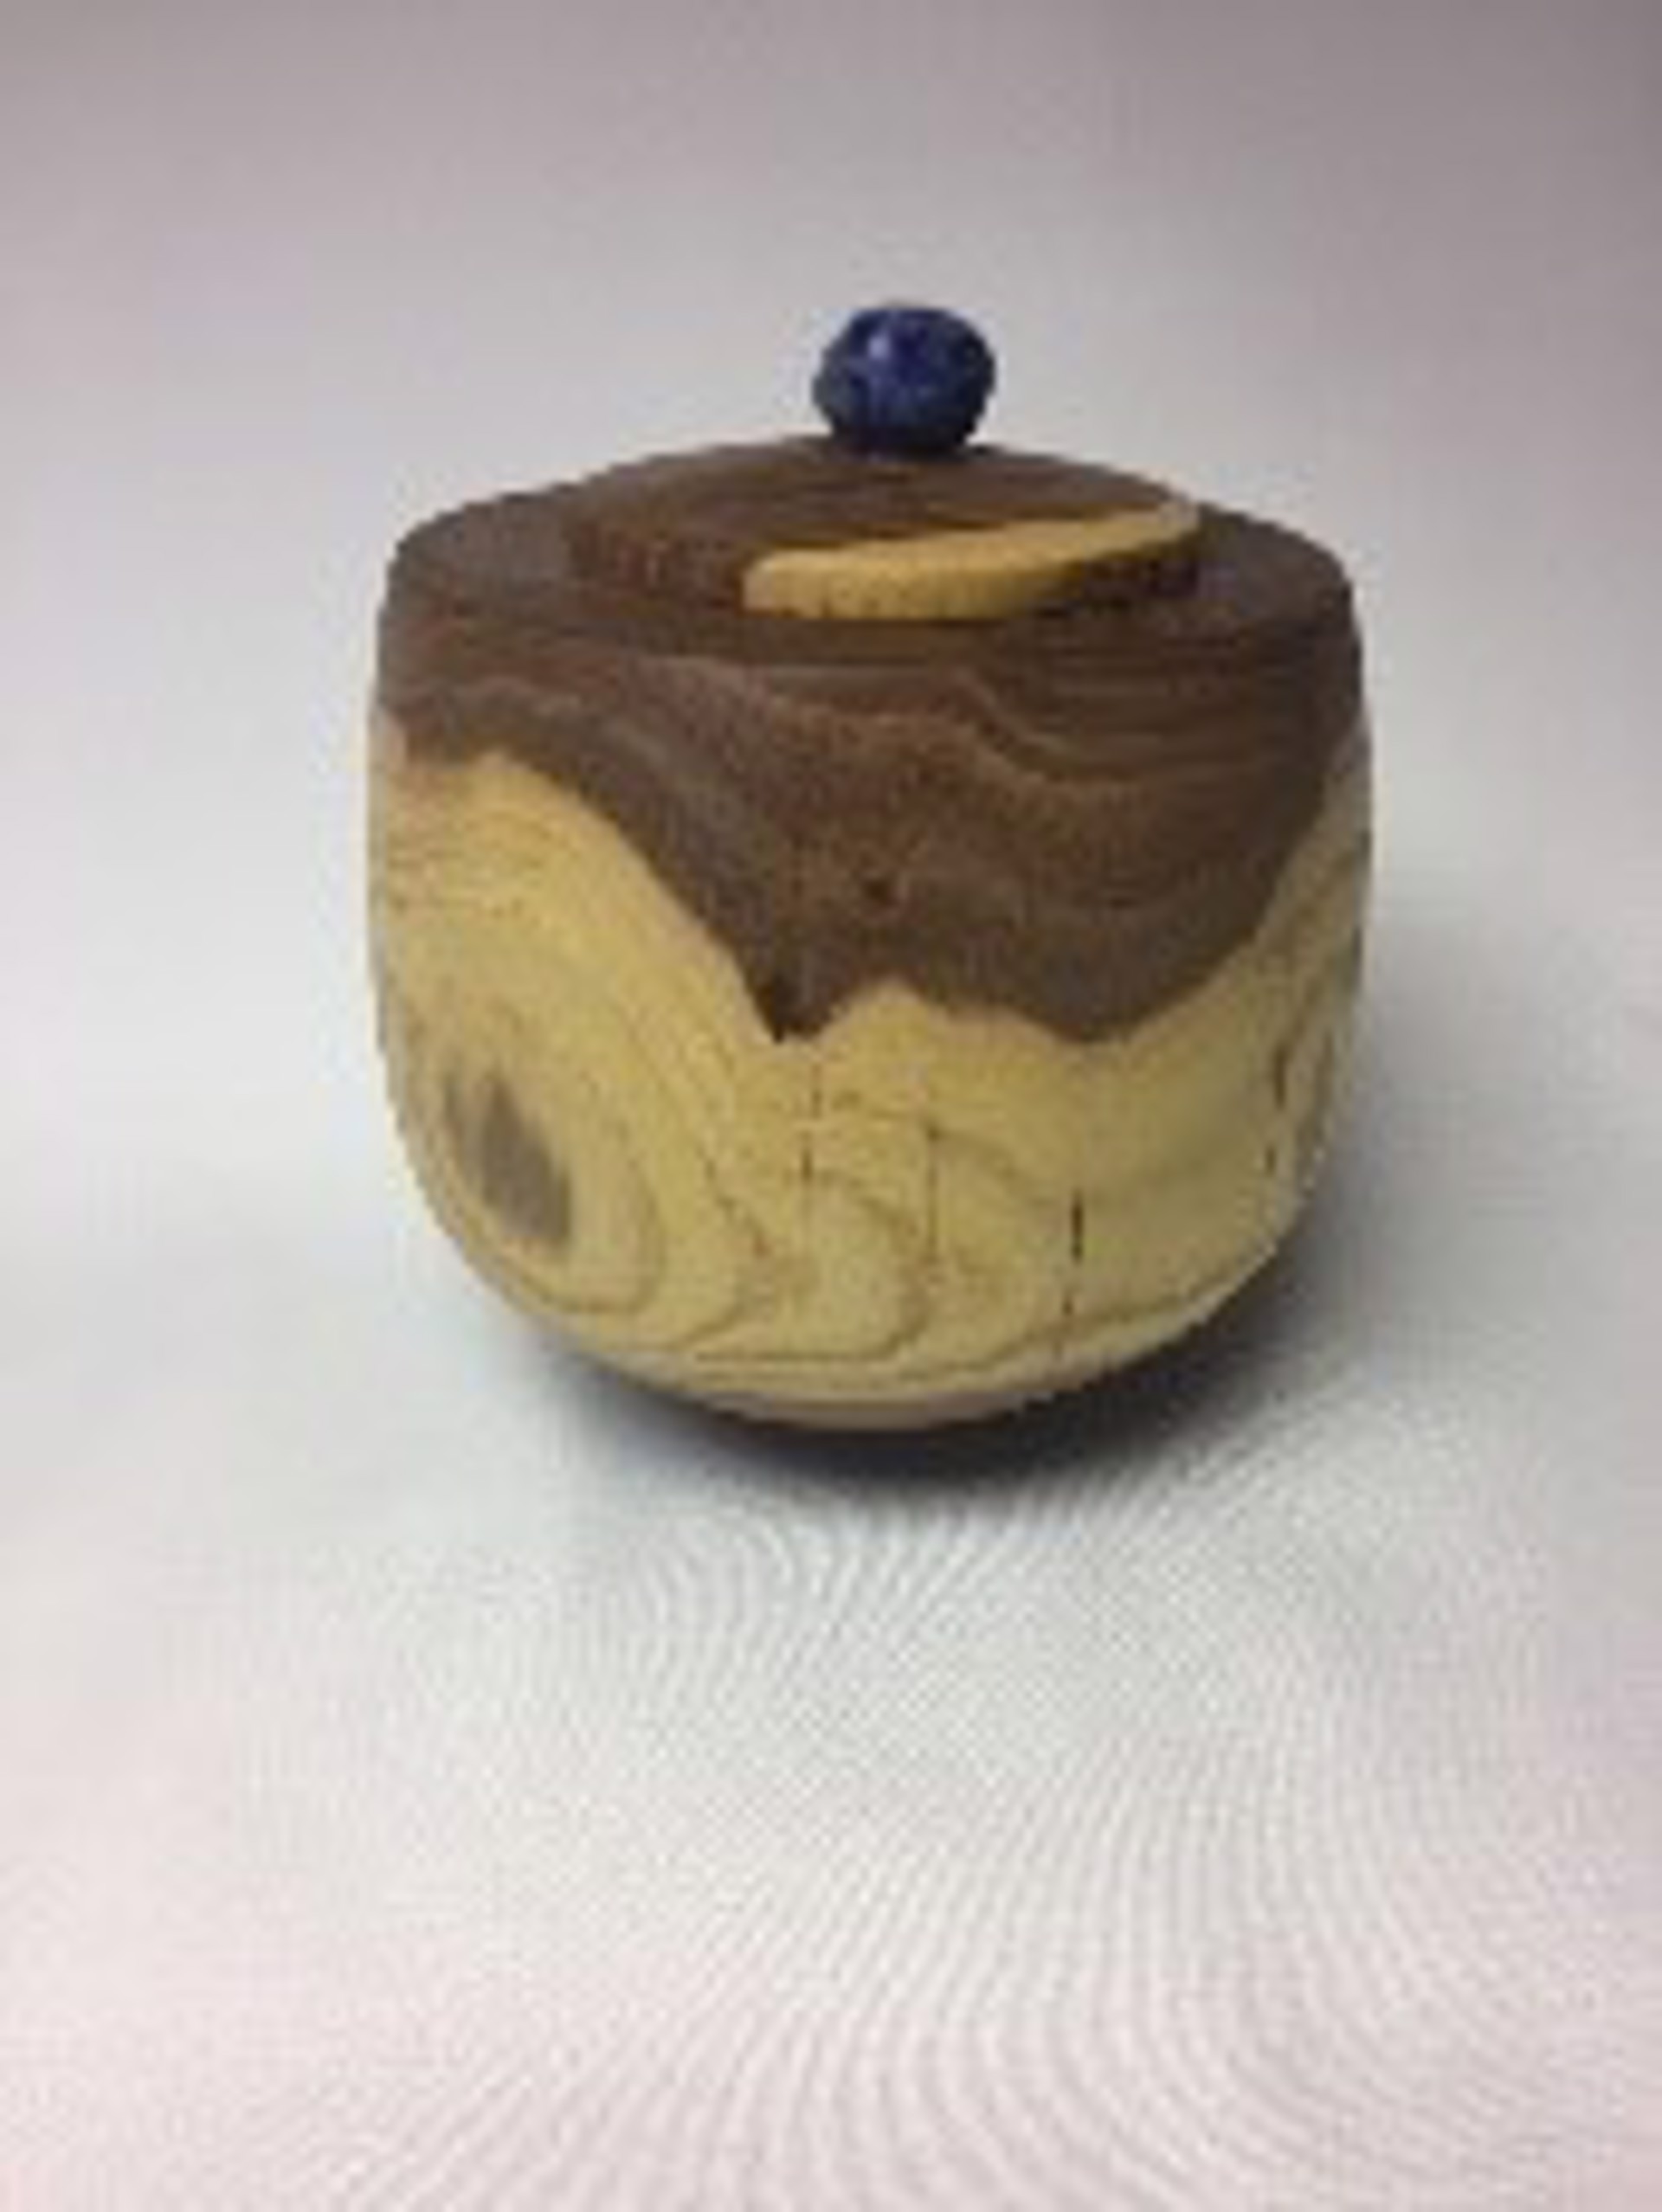 Turned Wood Jar W/Lid 21-55 by Rick Squires